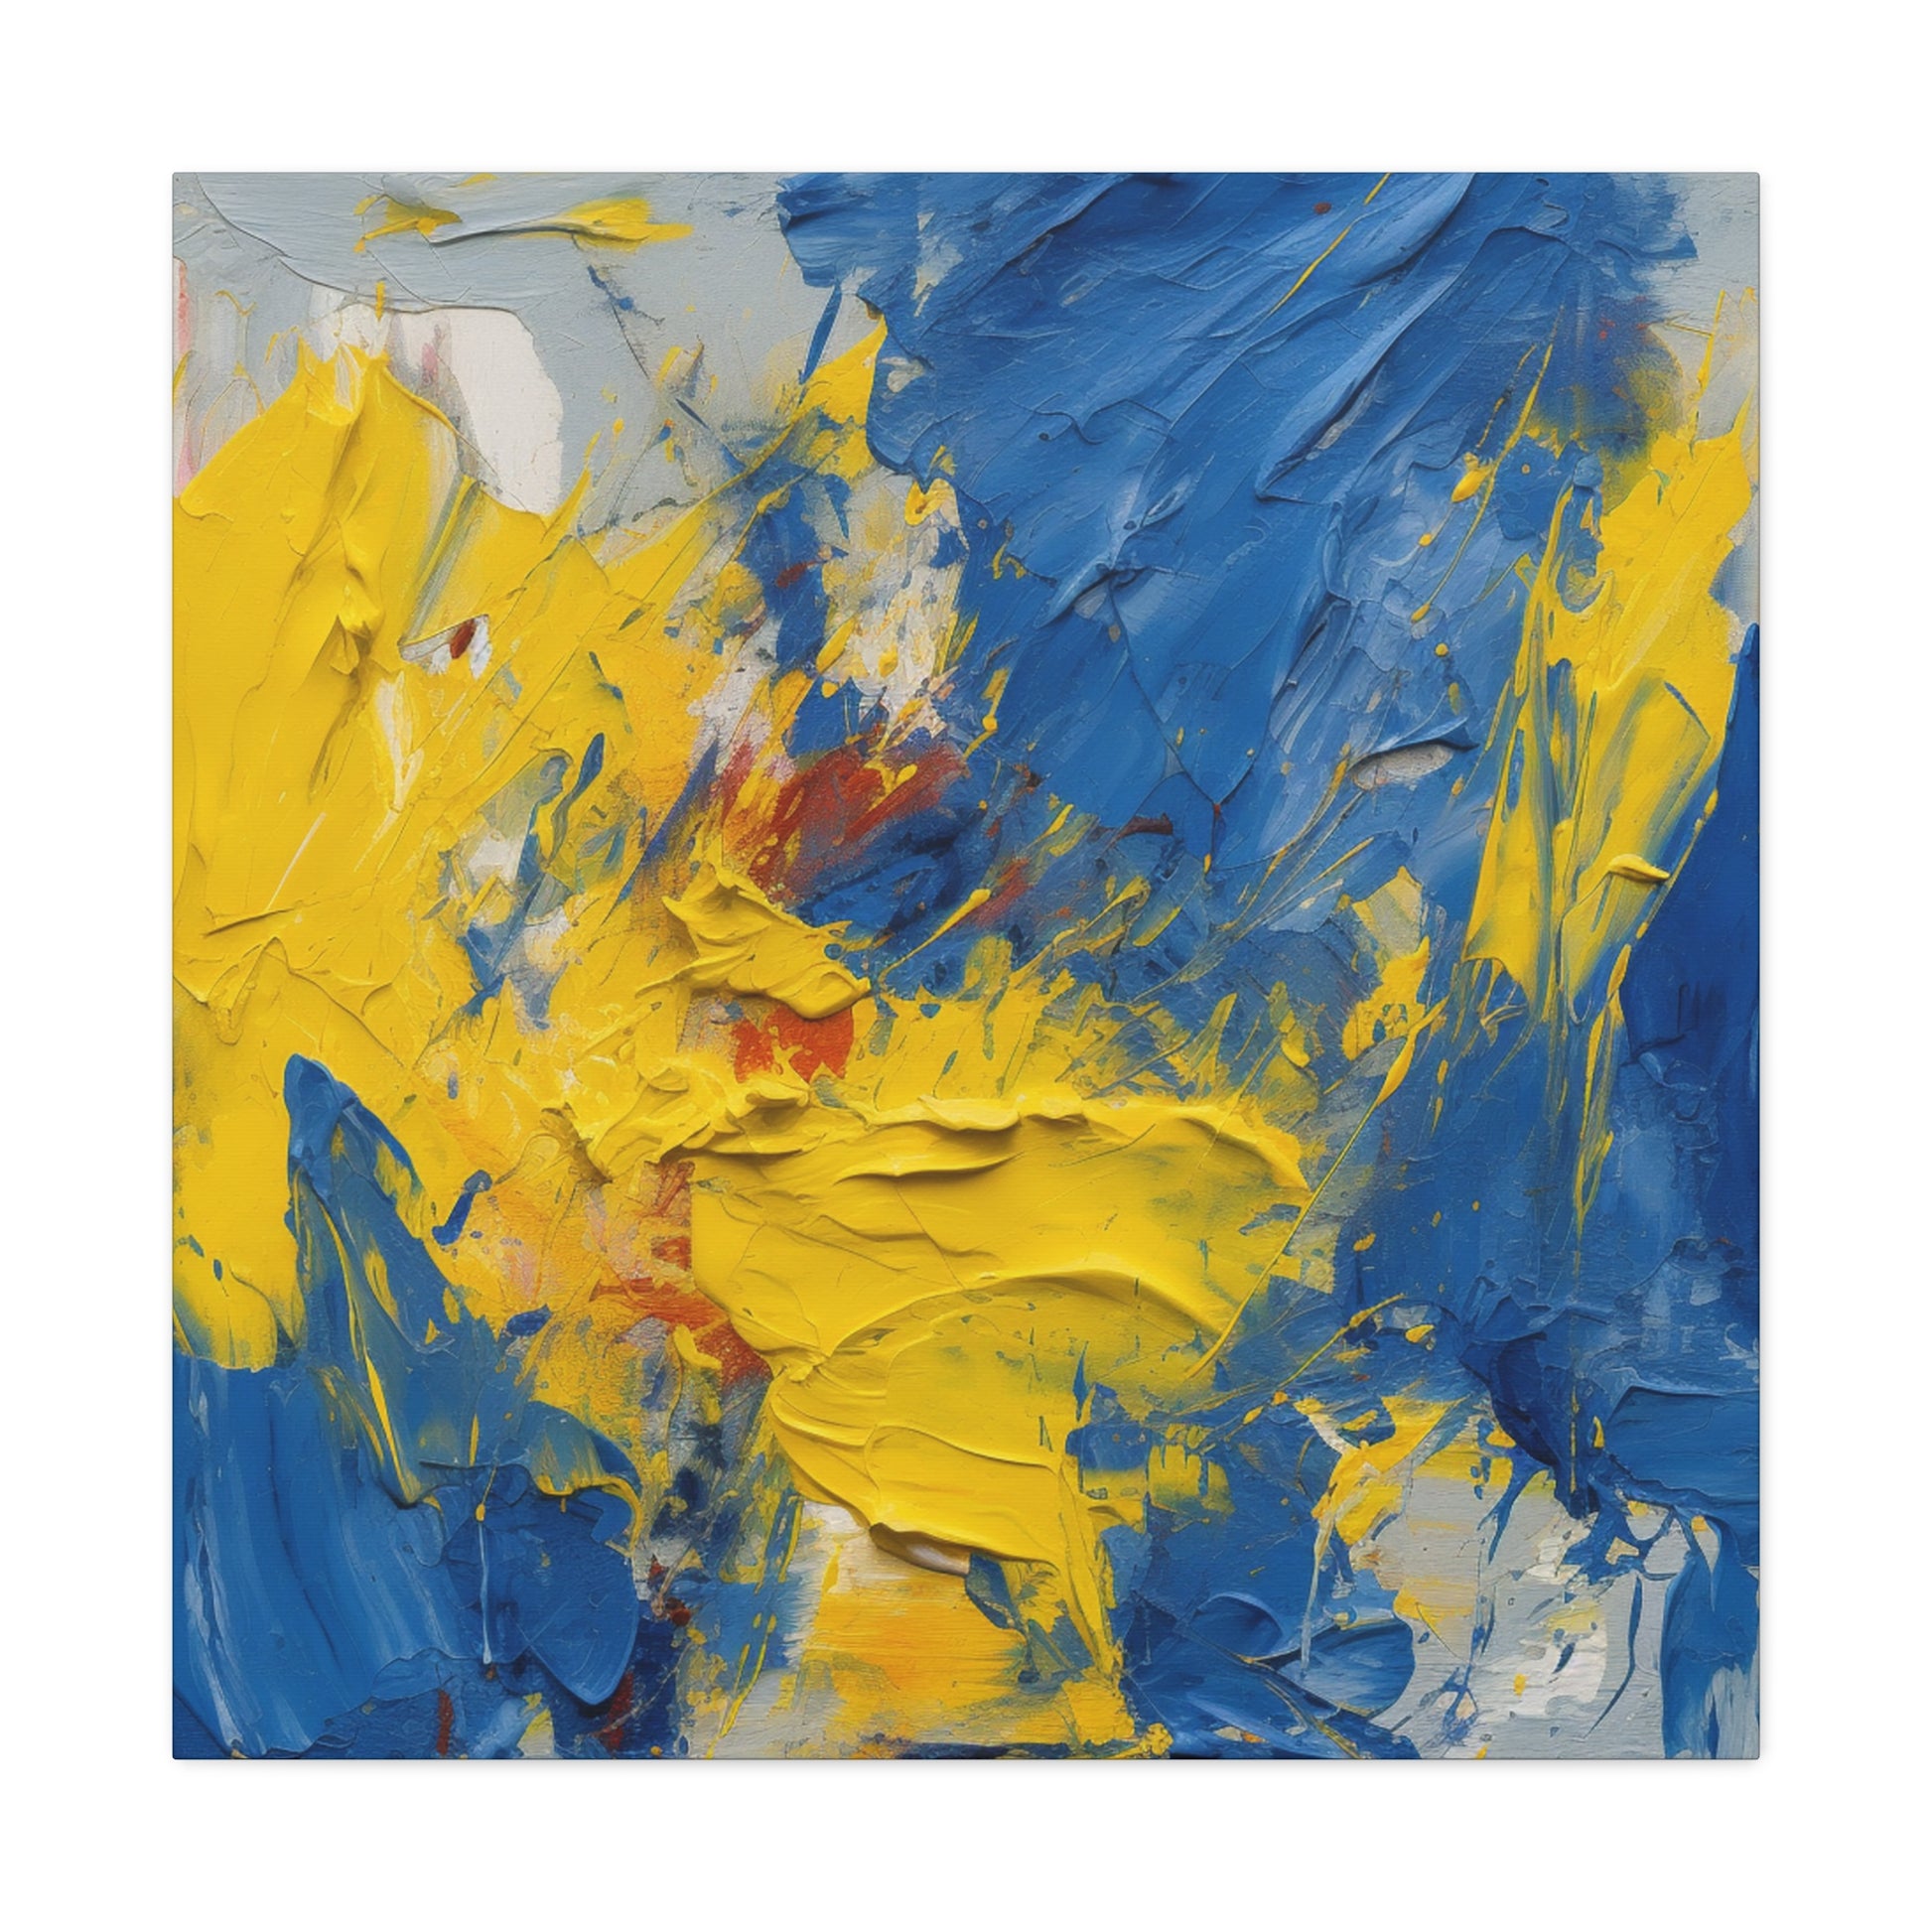 "Abstract Blue & Yellow" Wall Art - Weave Got Gifts - Unique Gifts You Won’t Find Anywhere Else!